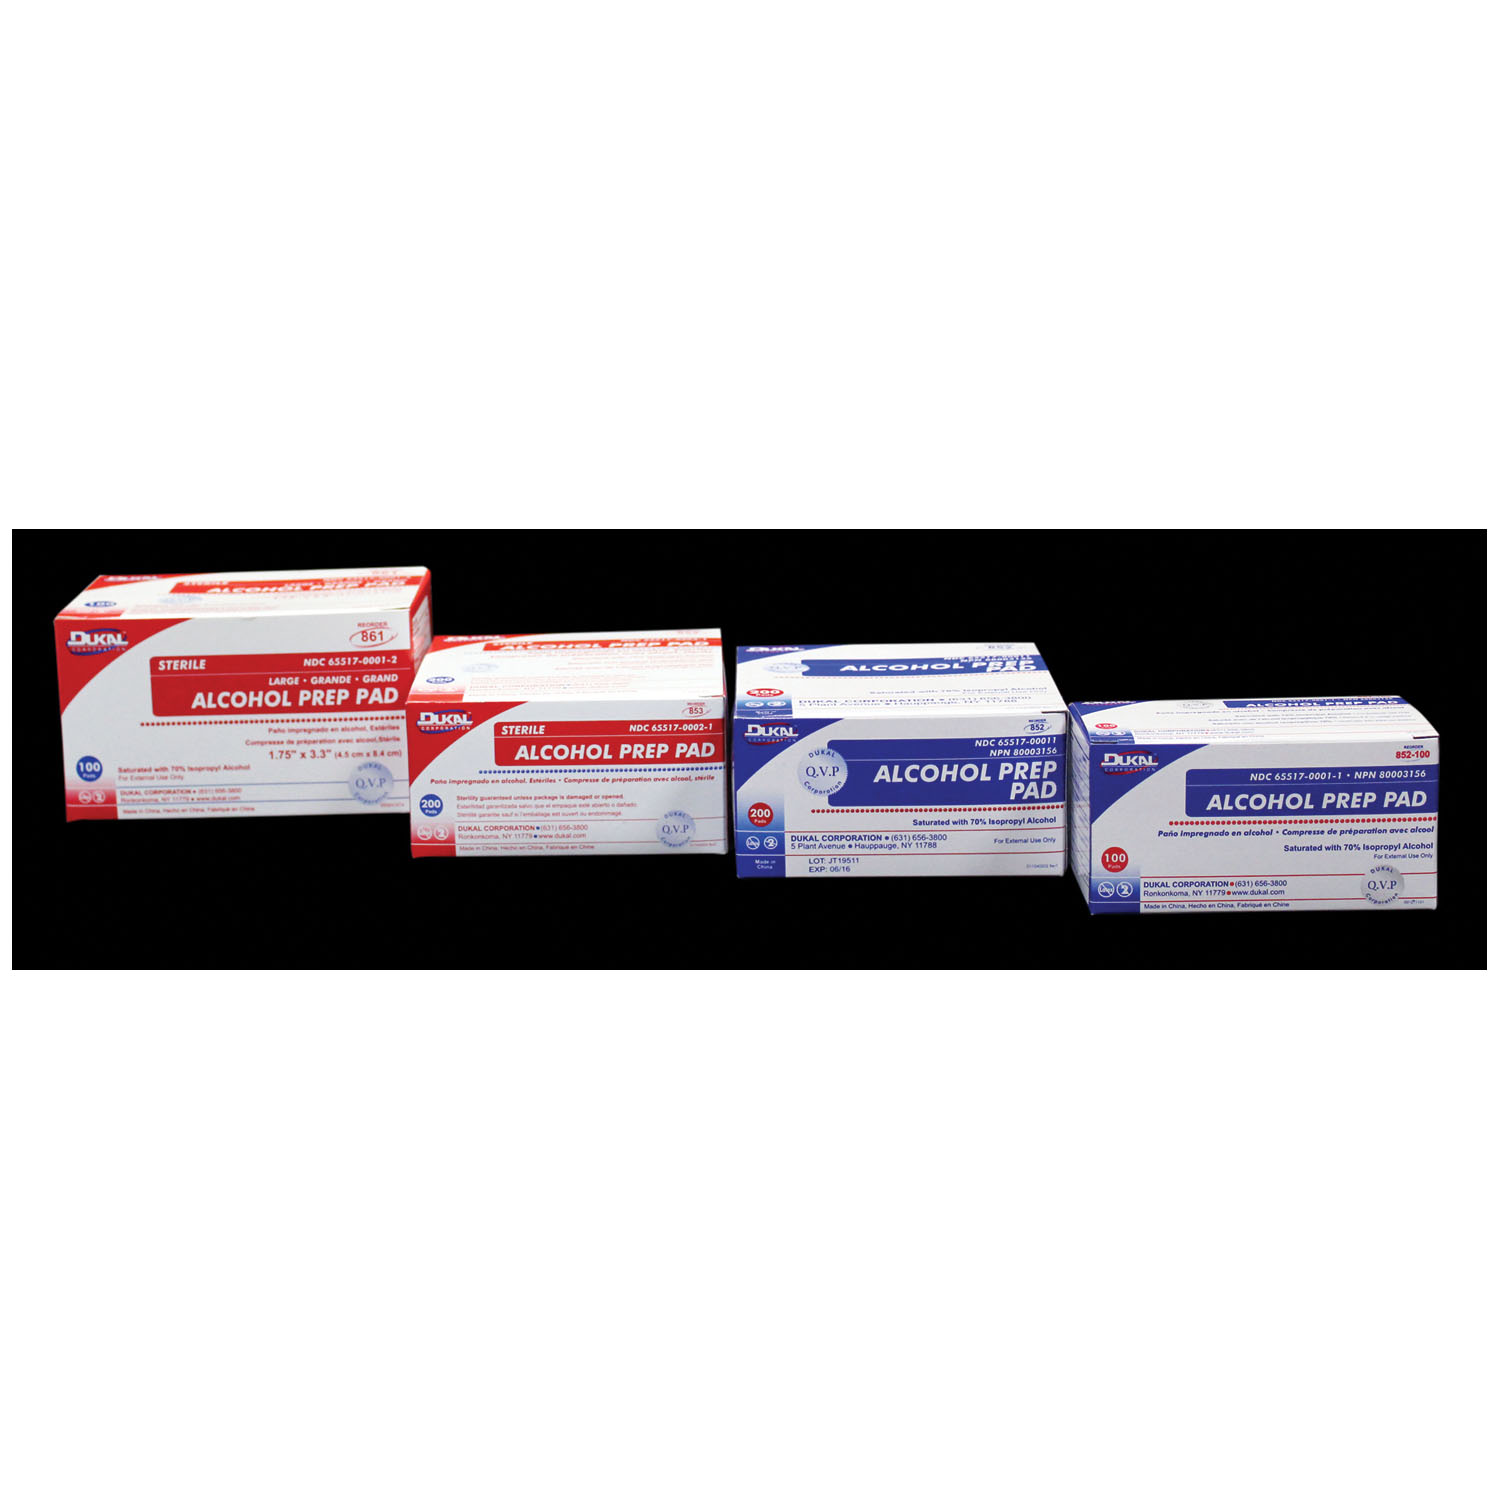 DUKAL ALCOHOL PADS : 861 BX $2.19 Stocked